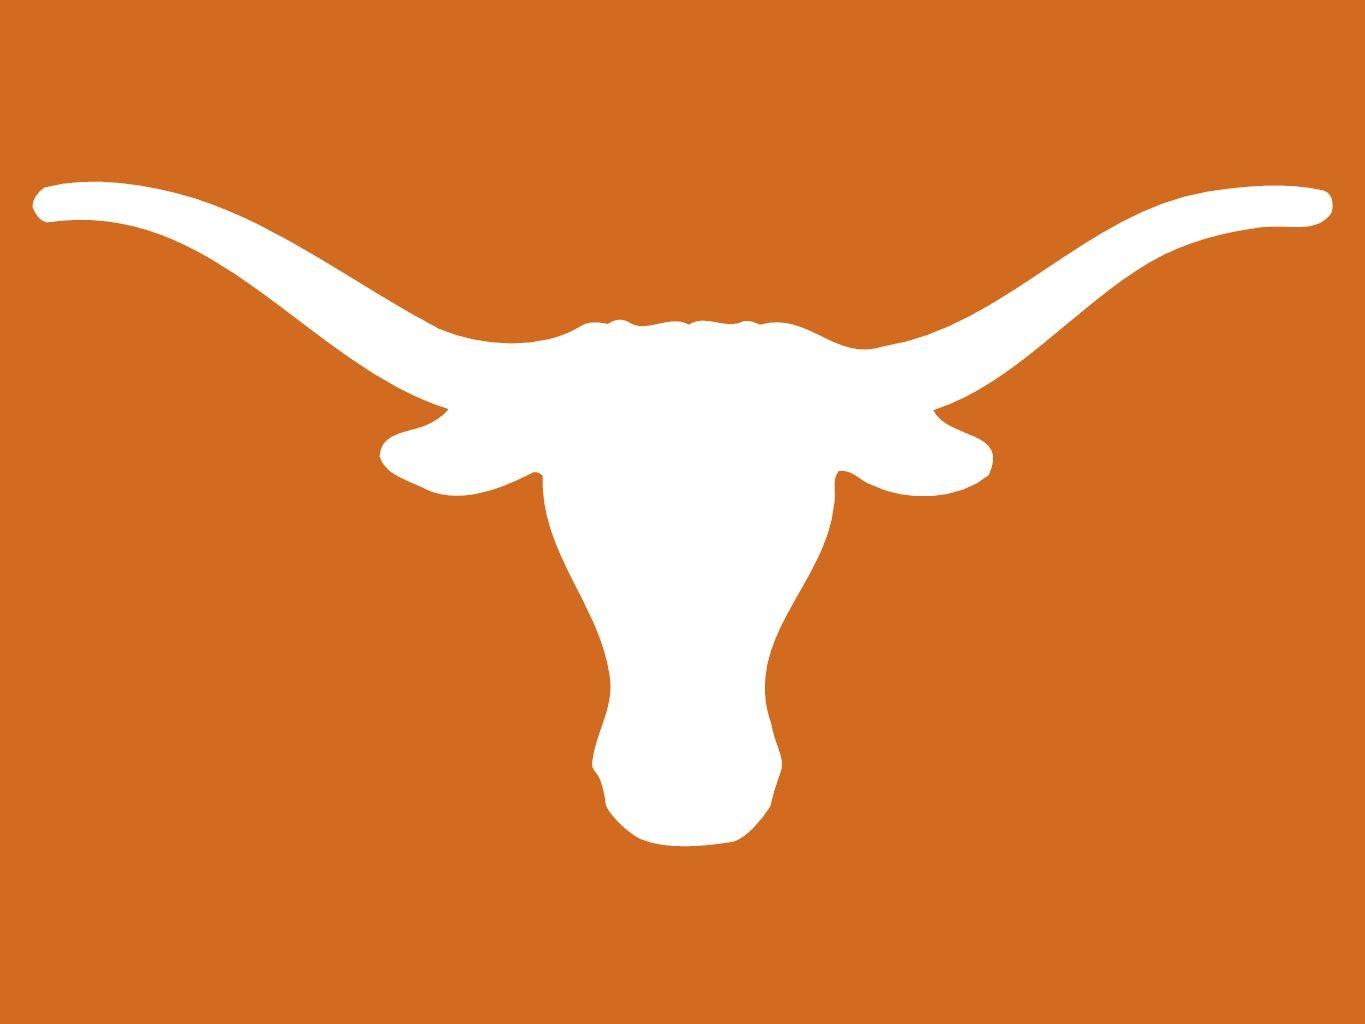 University of Texas Logo - BIG Opportunities to Sell Lab Equipment at Texas Life Science